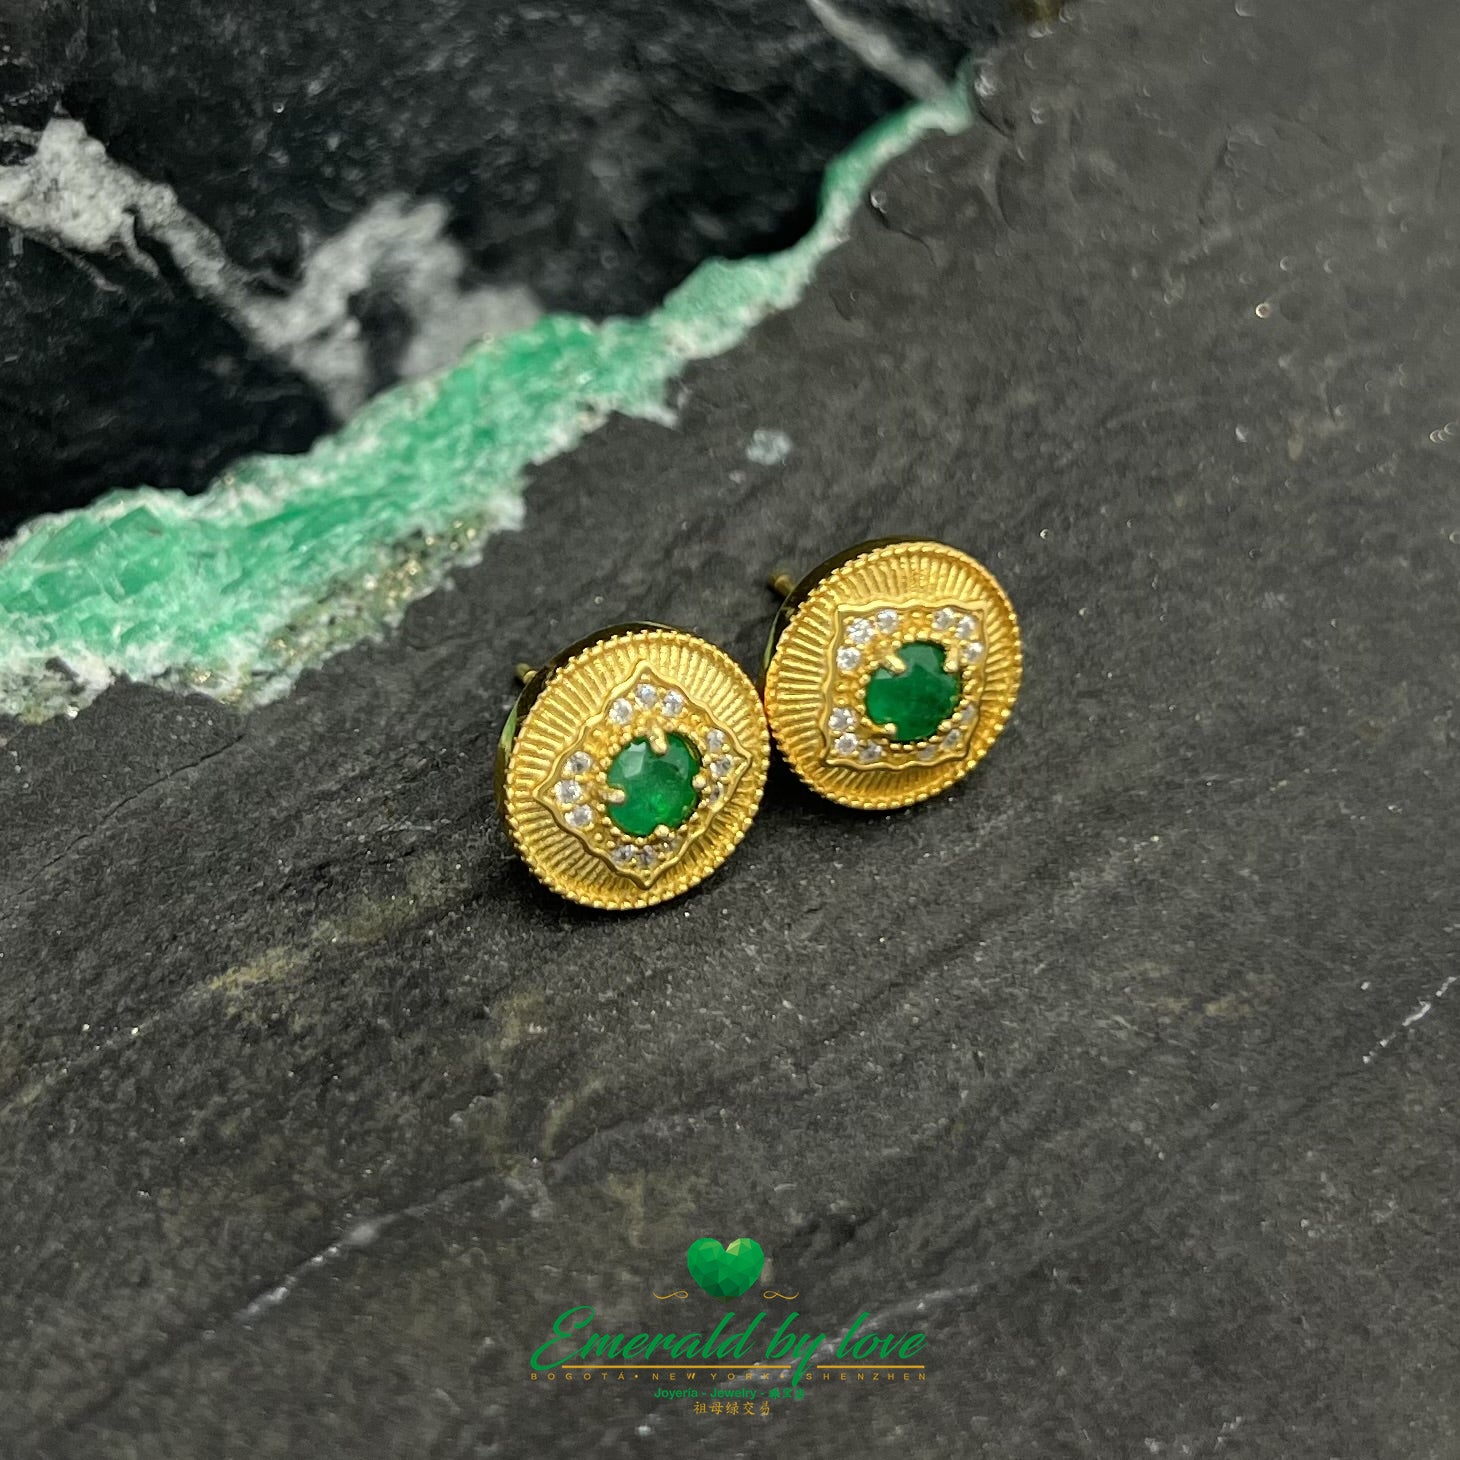 Round Sterling Silver Earrings with Gold Plating and Central Round Emerald